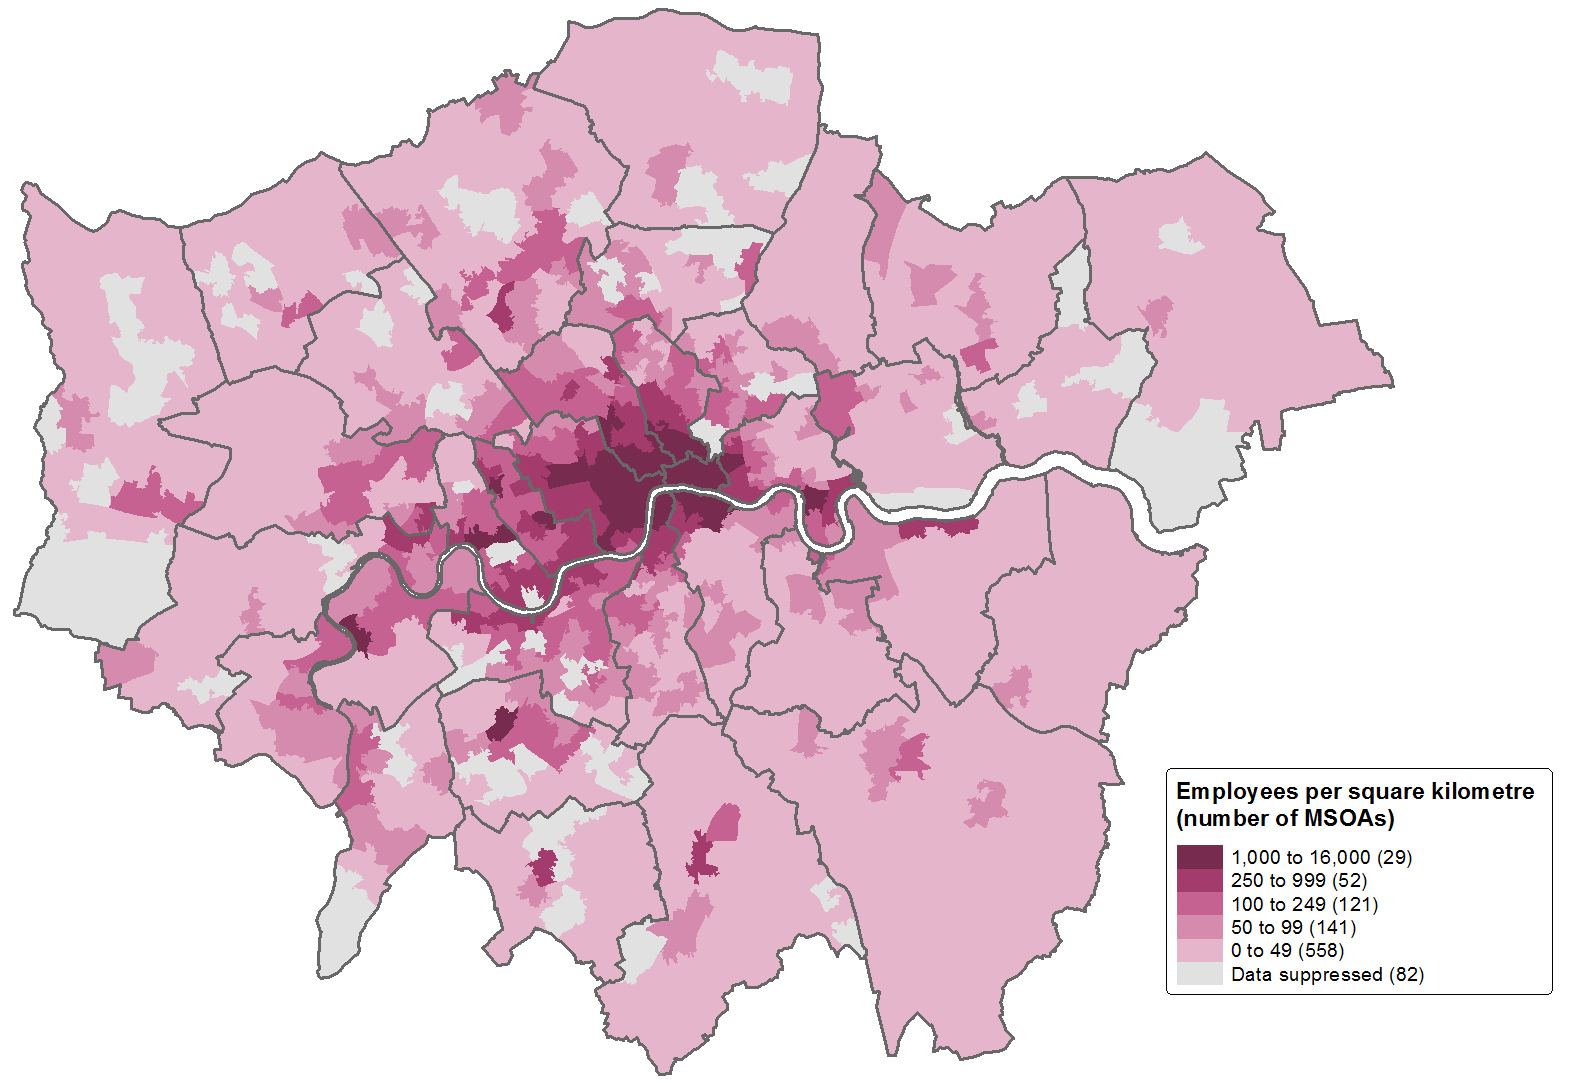 Employees in head office and management consultancy activities were highly concentrated in central London in 2015